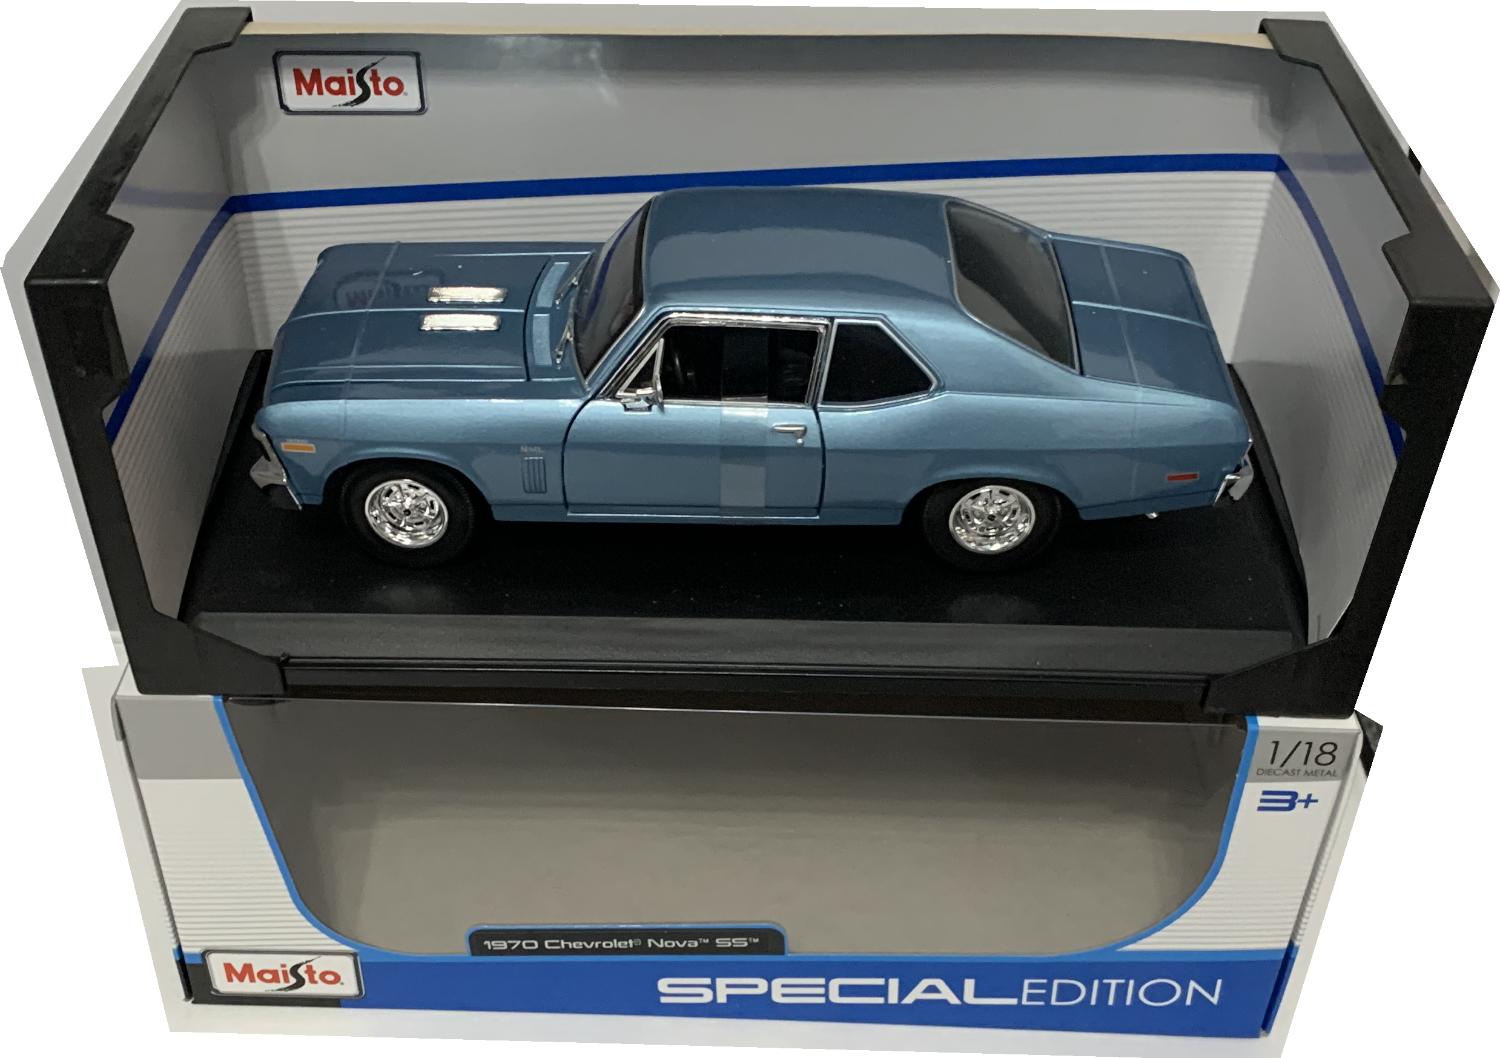 A good reproduction of Chevrolet Nova SS Coupe with detail throughout, all authentically recreated. The model is presented in a window display box, the car is approx. 26 cm long and the presentation box is 33 cm long